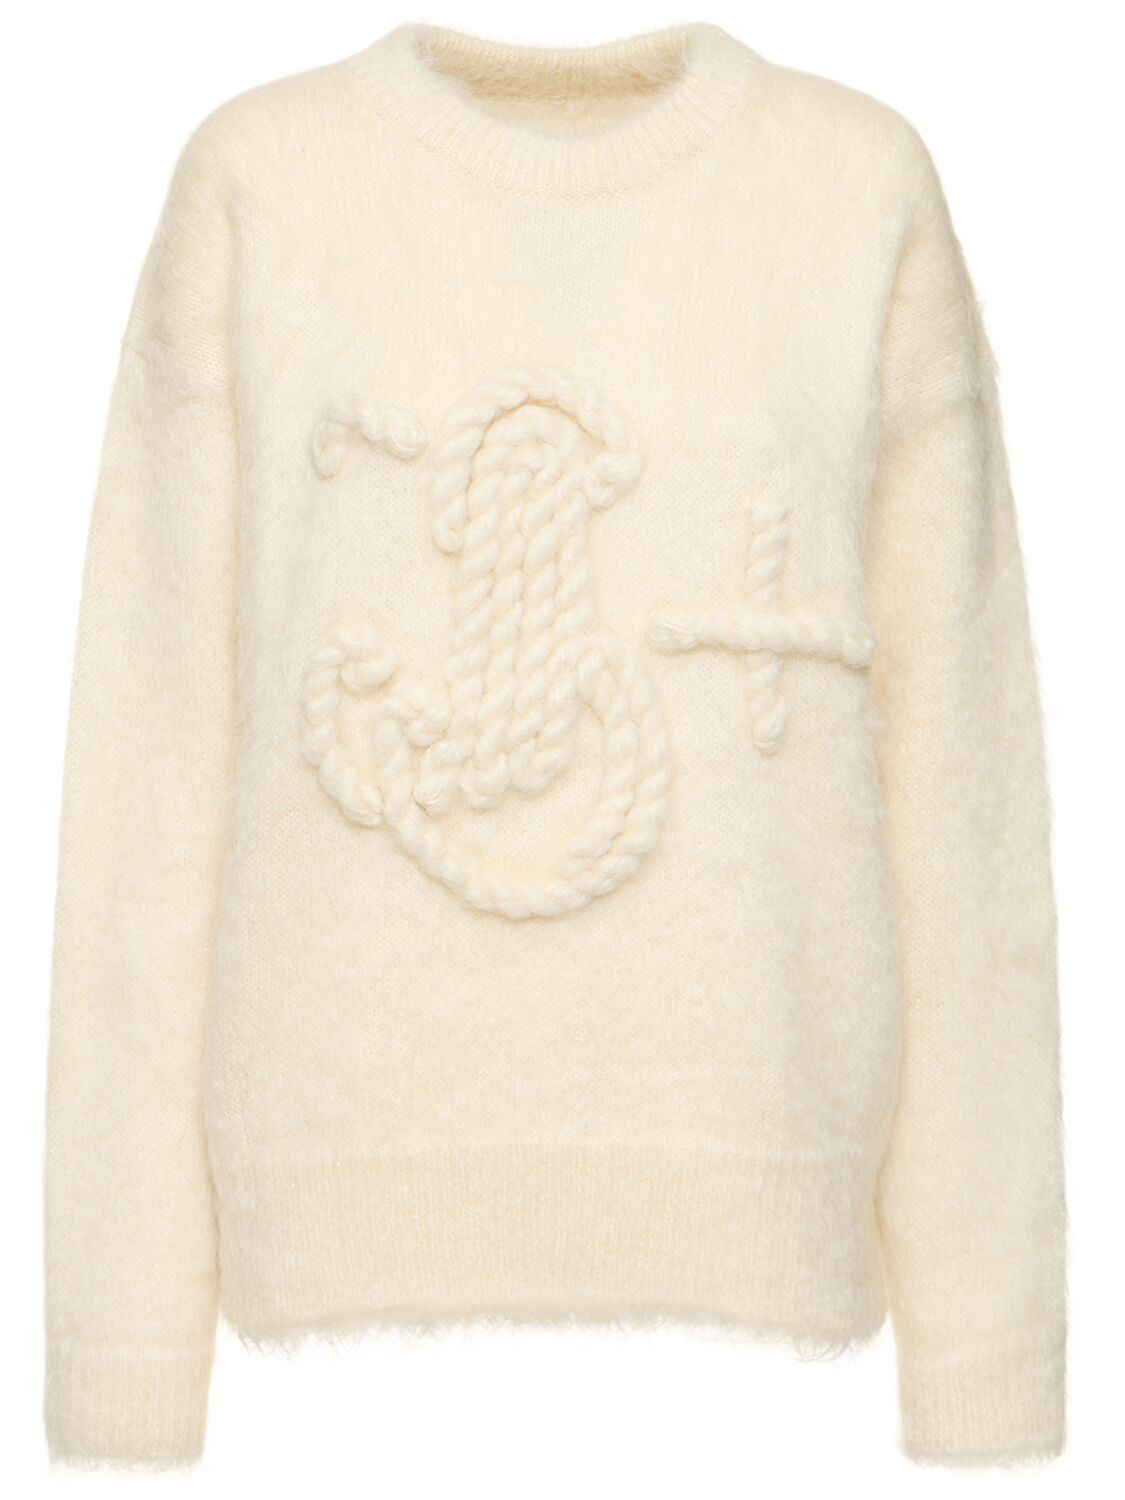 Image of Embroidered Mohair Blend Knit Sweater